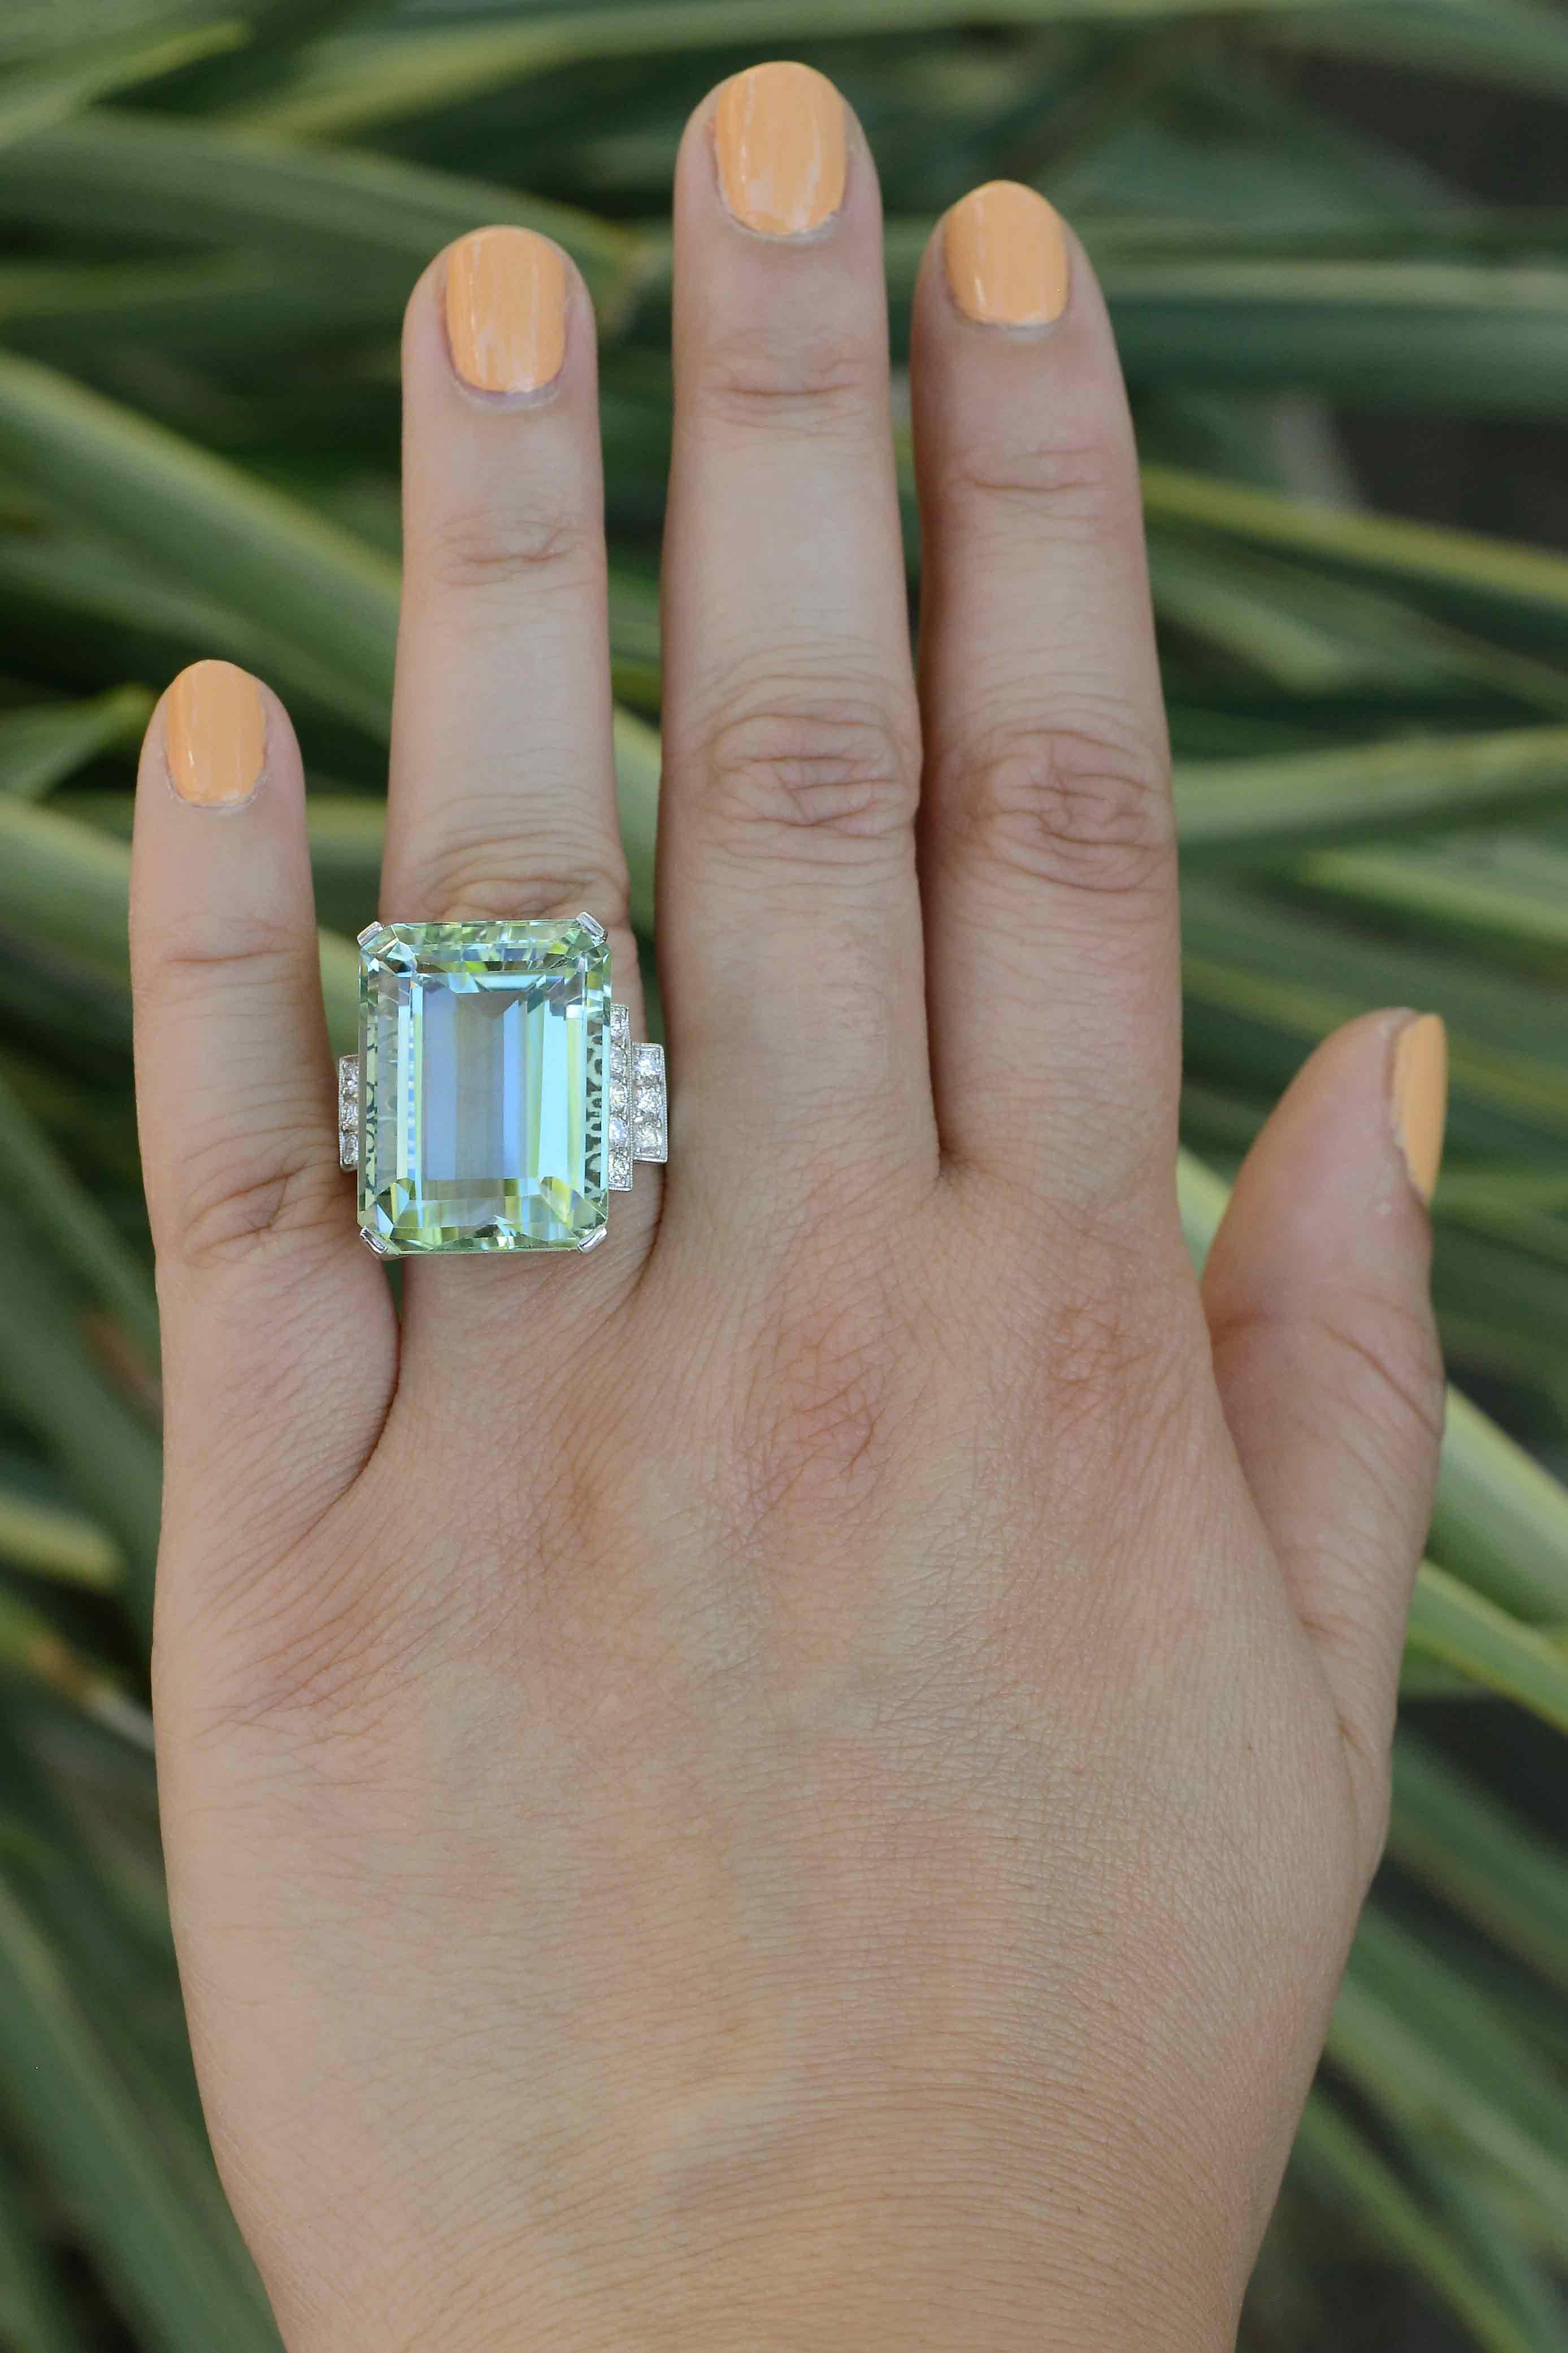 This marvelous 31.53 carat aquamarine platinum cocktail ring is fitted in grand 1940s retro style. A large, intriguing emerald cut gemstone boasting a magnetic greenish blue hue, evoking the mystery of the sea. You will get lost staring into the